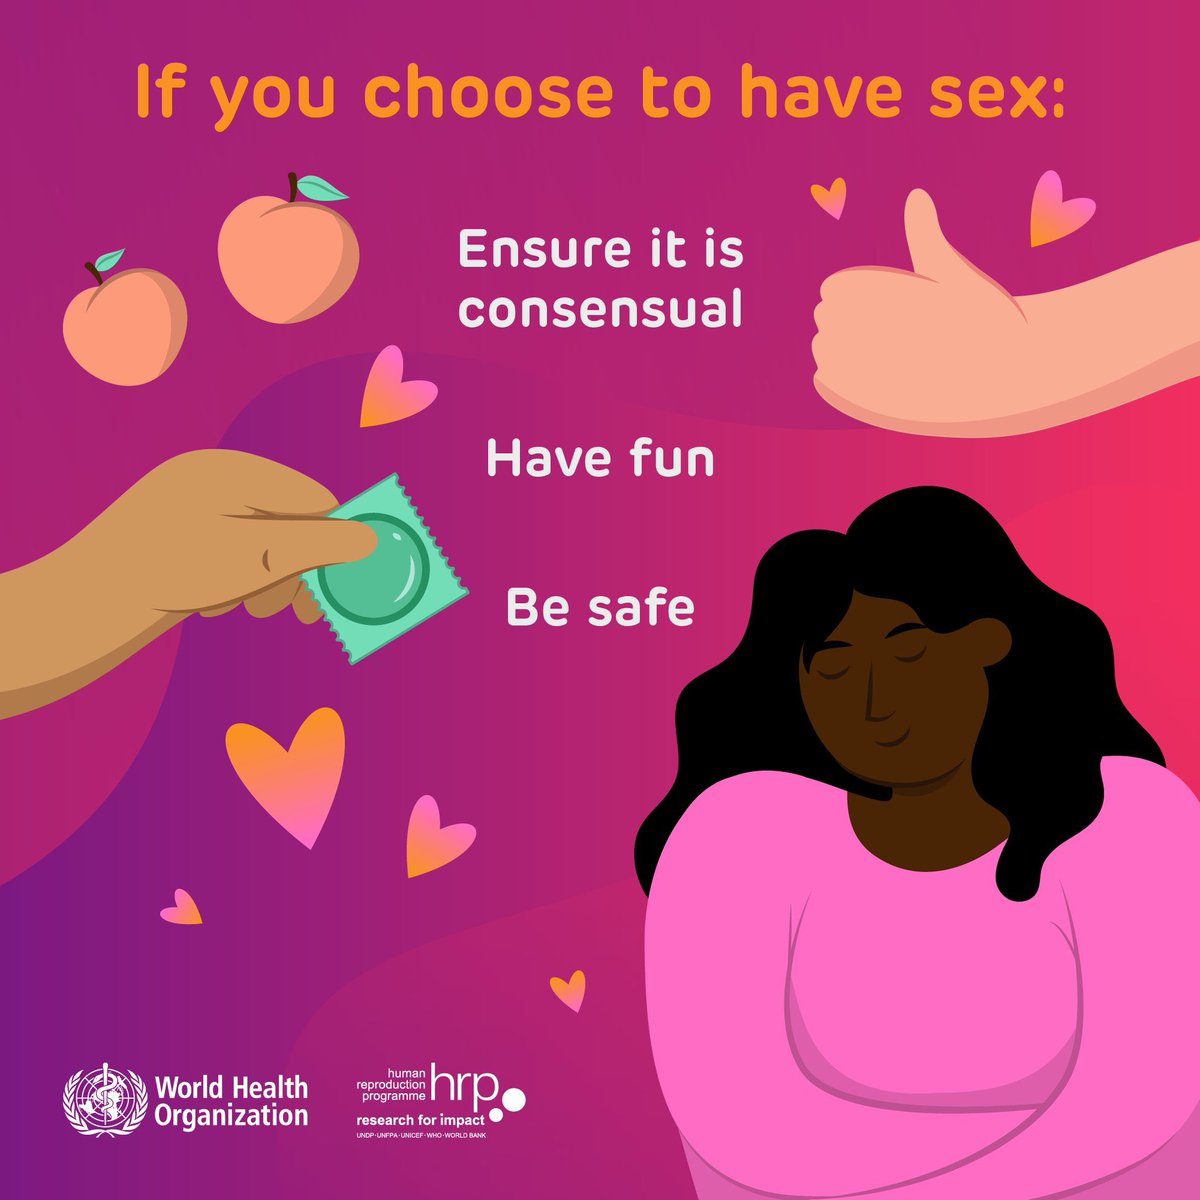 Let’s talk about S-E-X! Today is World #SexualHealth Day. If you choose to have sex: ♥️ Ensure it is consensual 👍 Have fun ✅ Be safe More info 🔗bit.ly/3PiUxEi